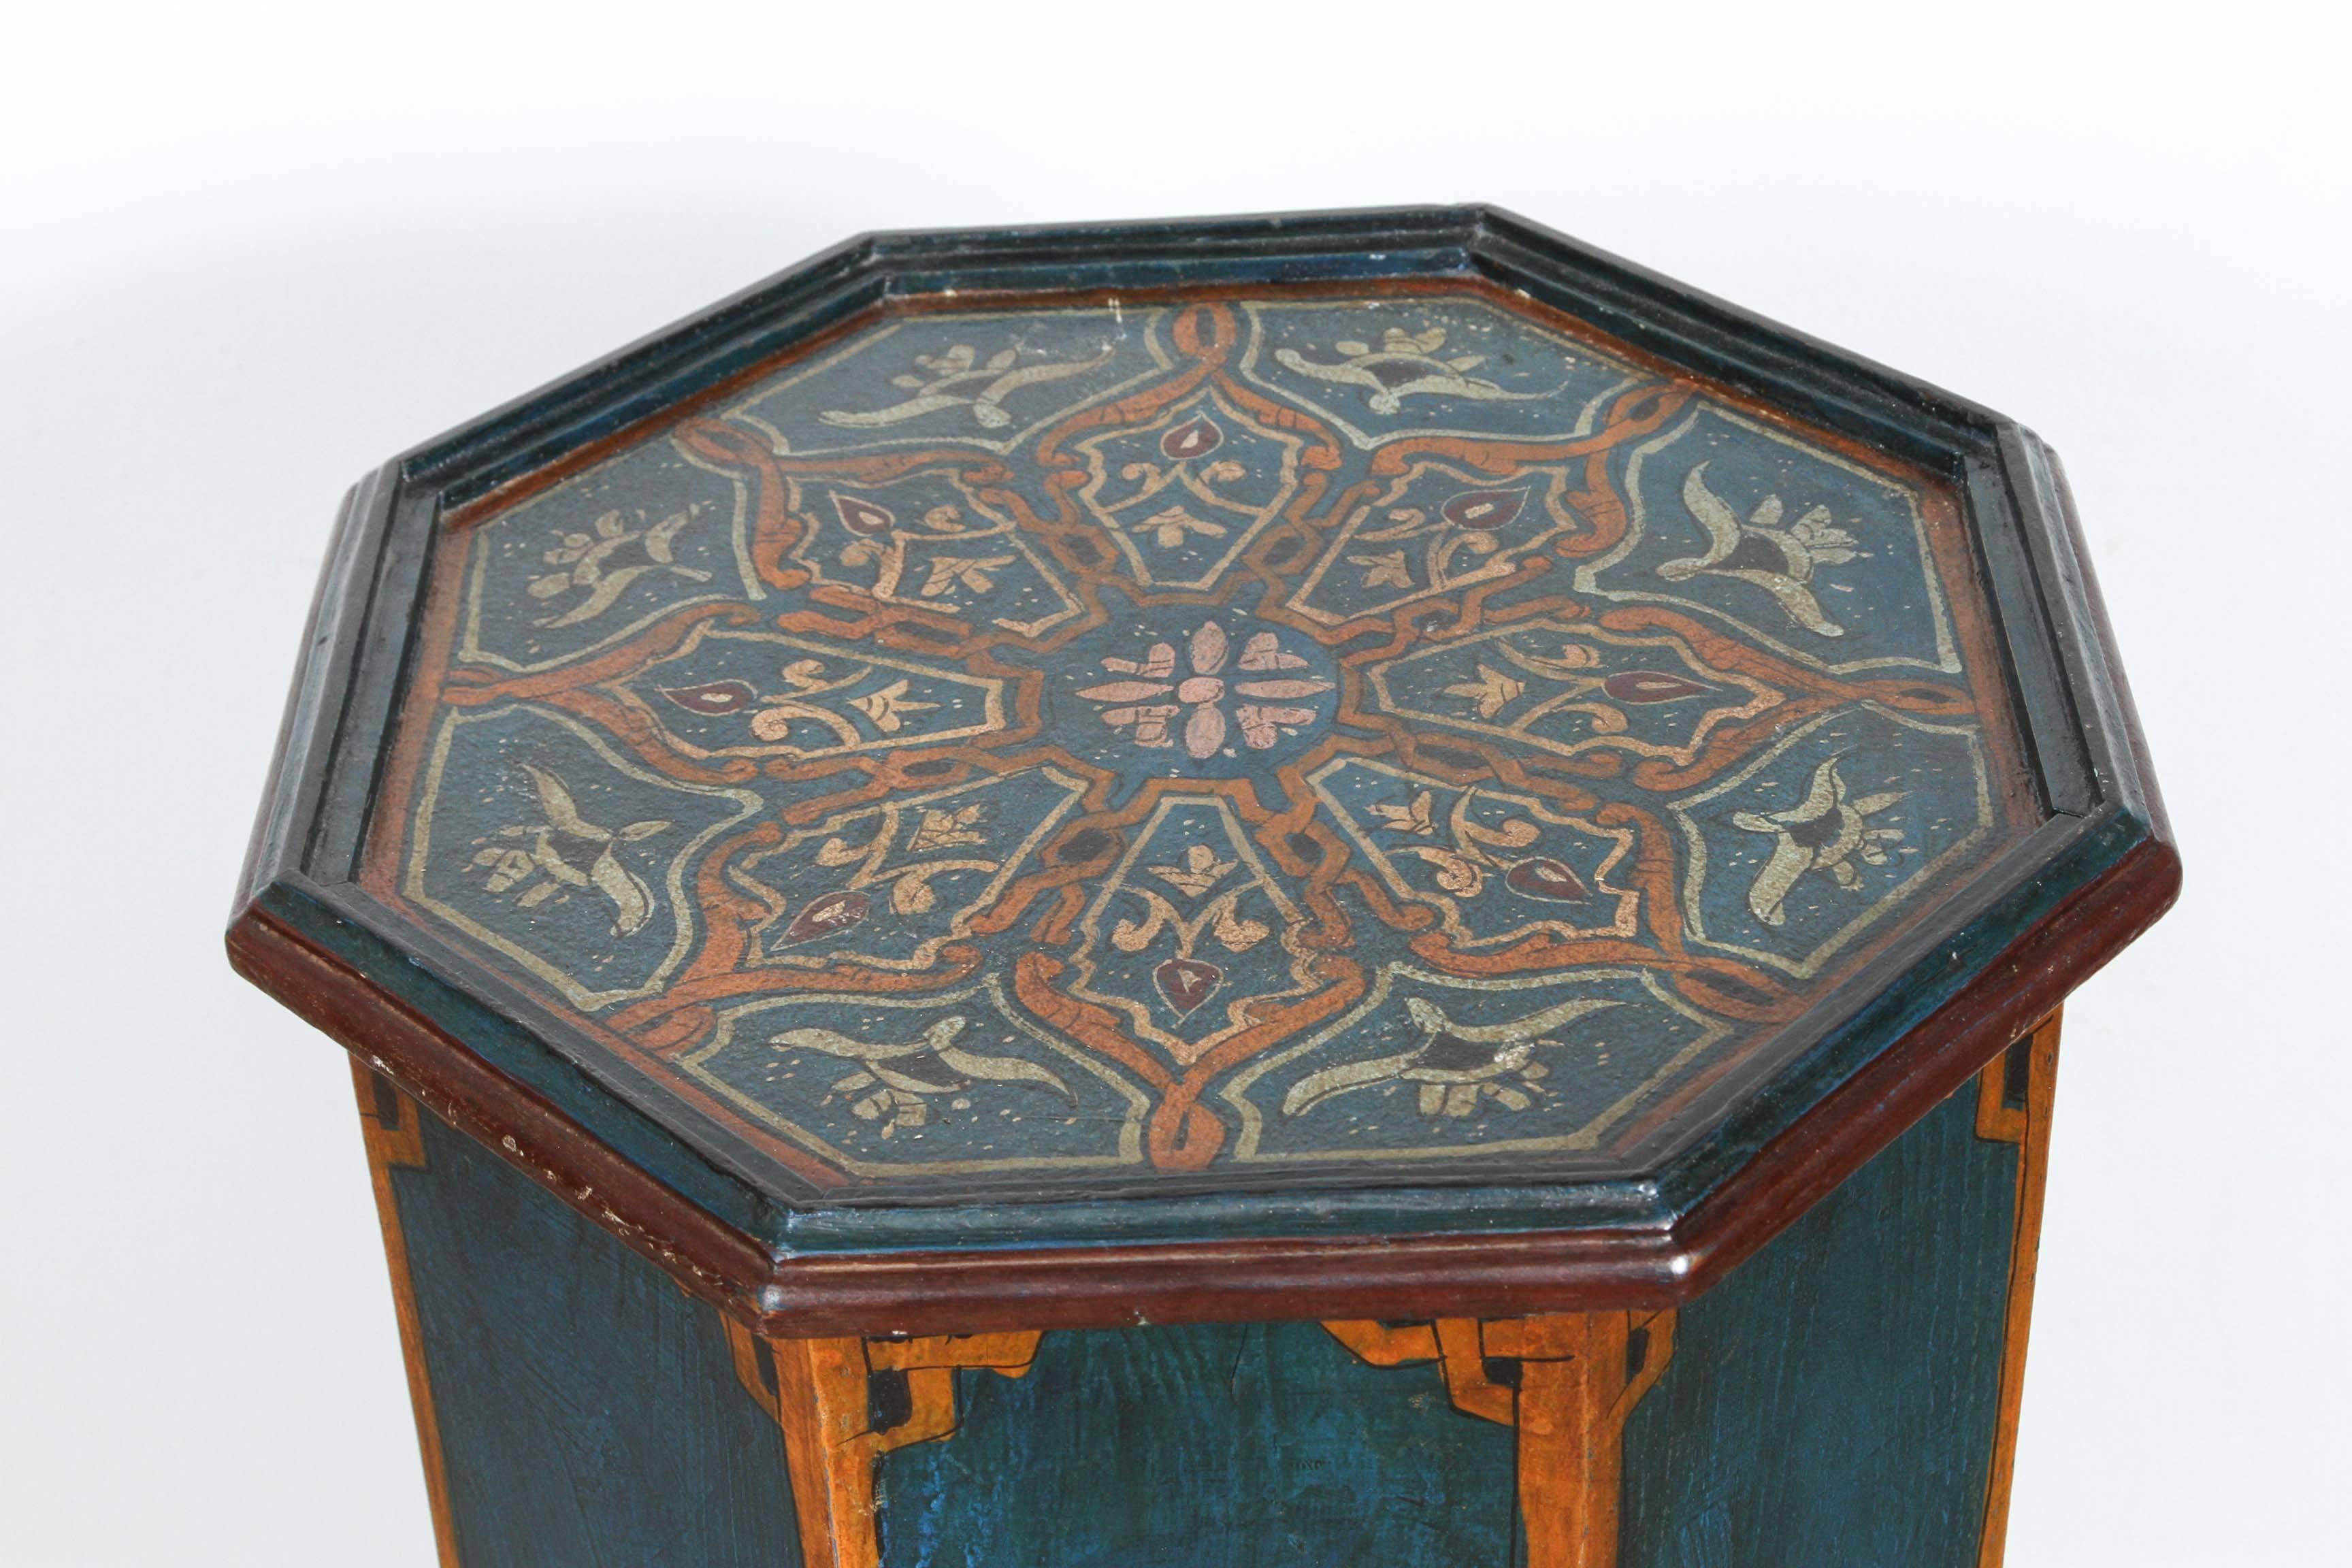 Moroccan vintage pedestal blue table, hand-painted on a blue background with floral and geometric designs in brown and ivory colors.
Moorish arches on the base of these octagonal shape tables.
Handcrafted by skilled artisans in Morocco.
Please